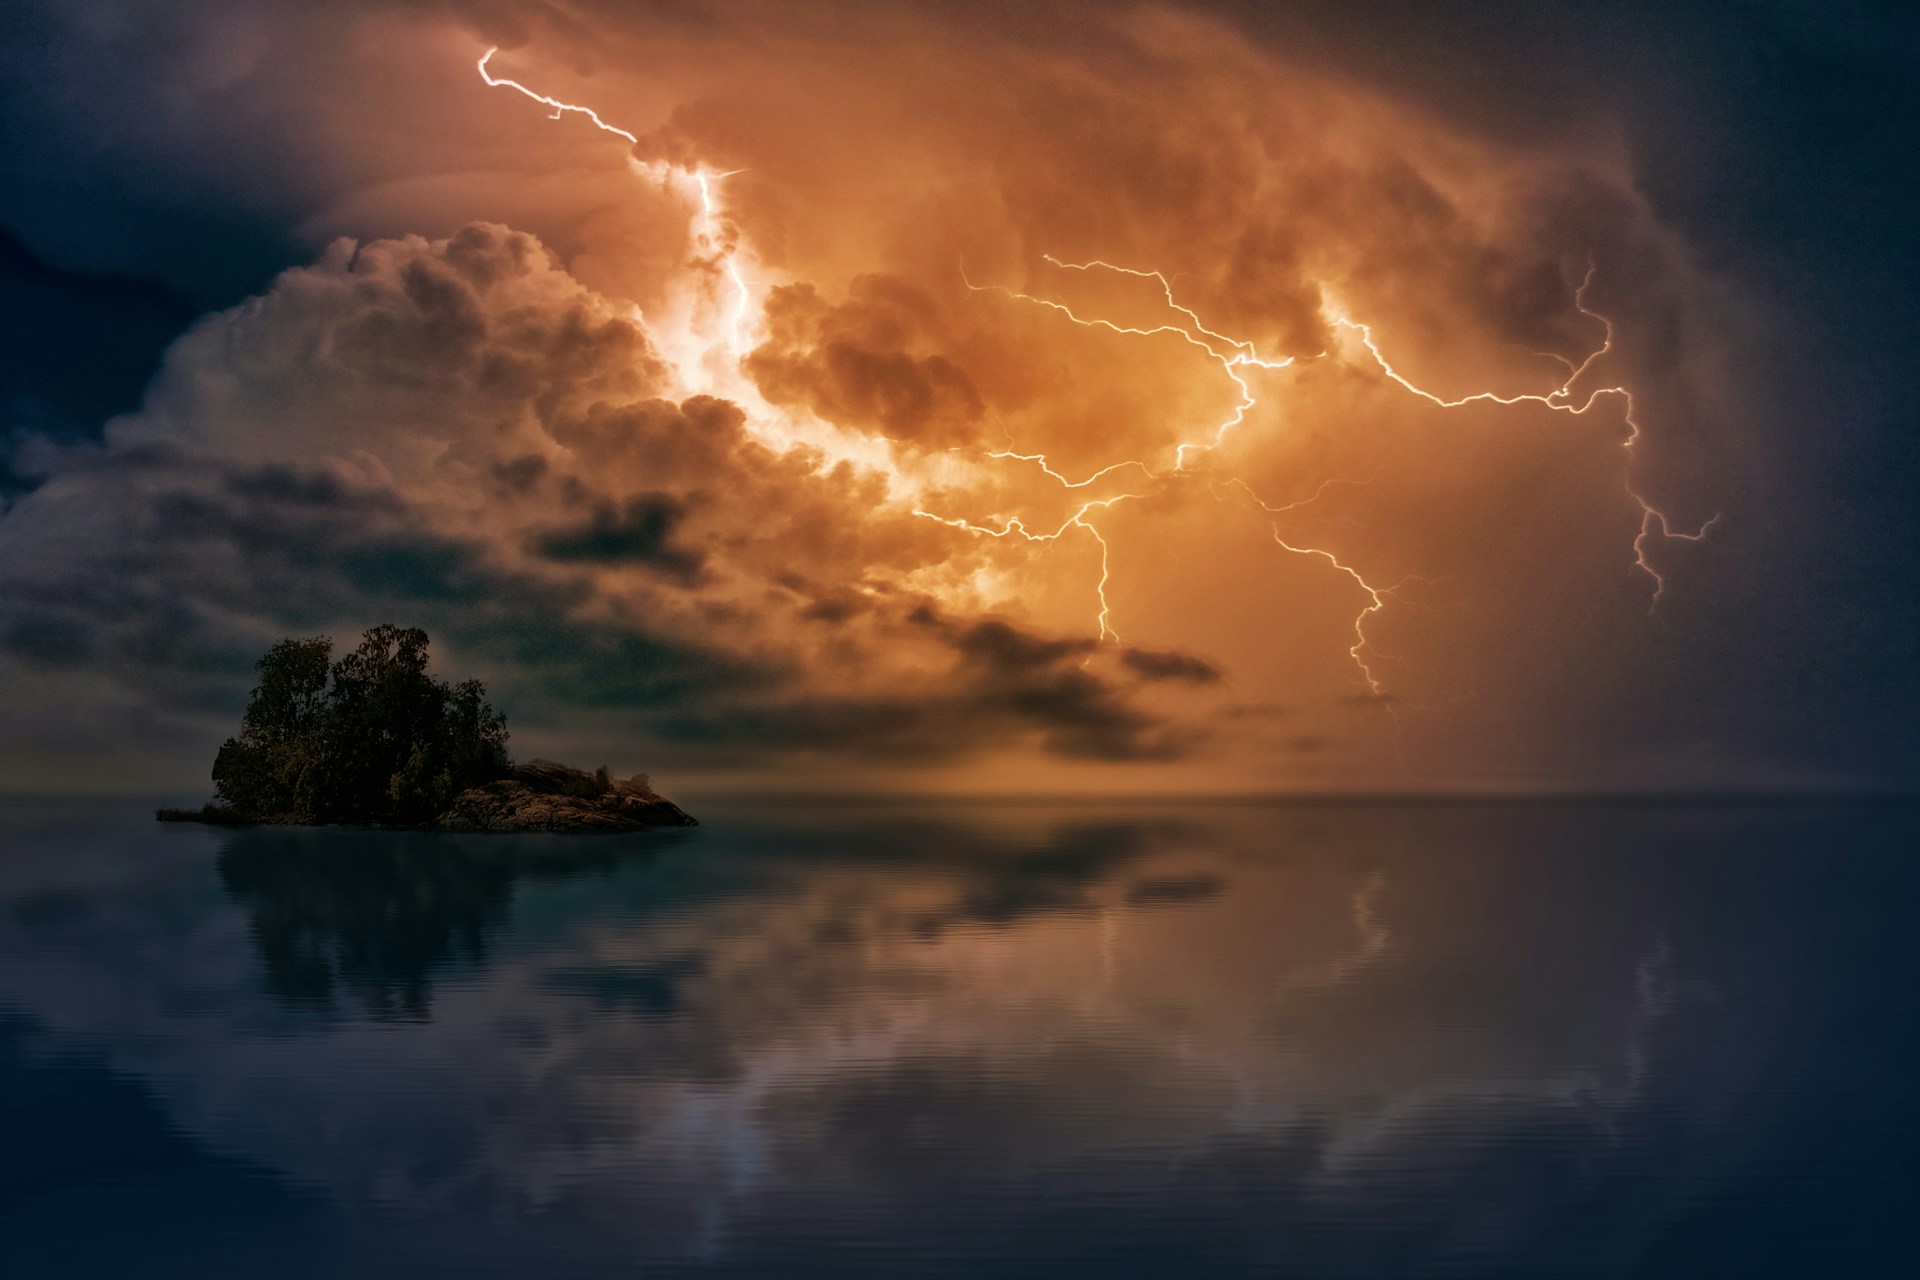 Lightning over a body of water